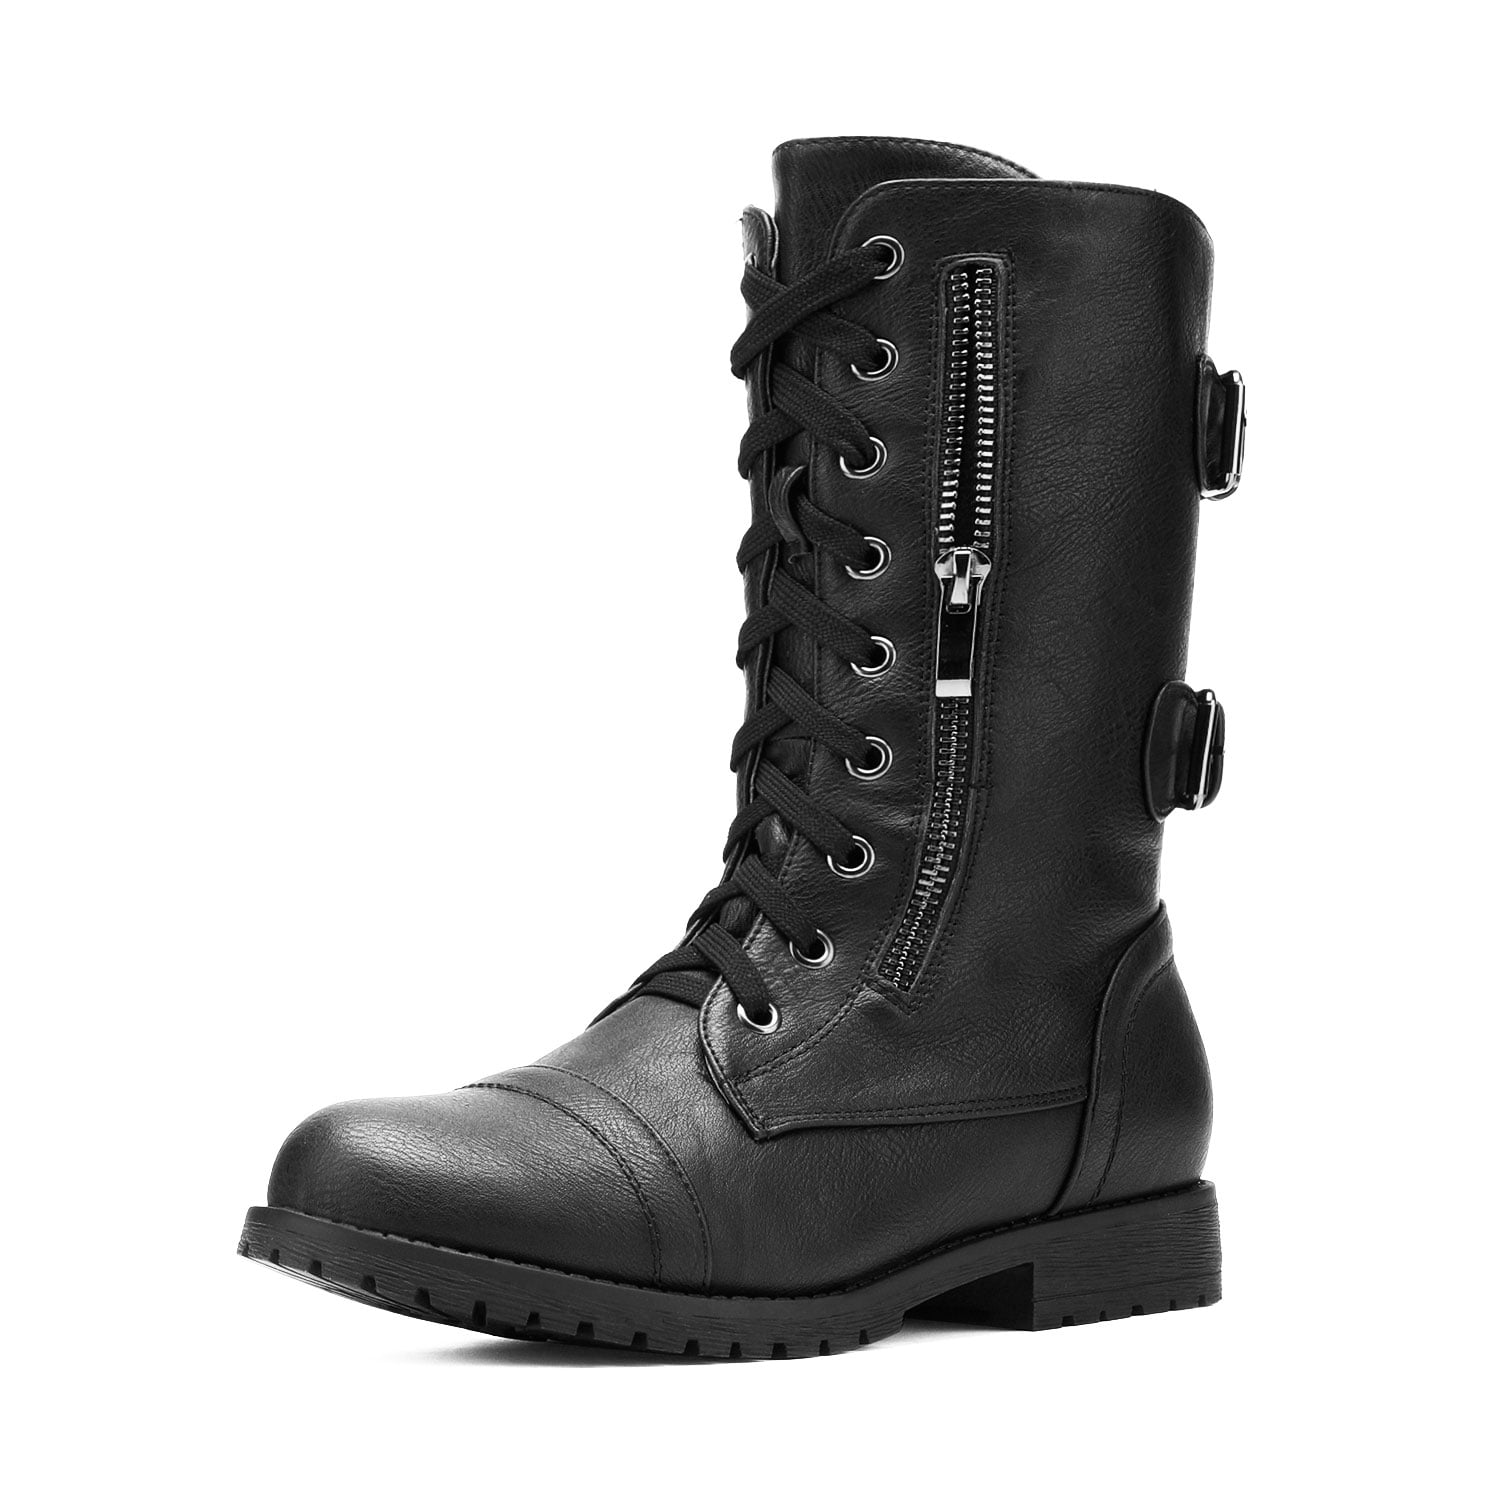 save money with deals DREAM PAIRS Women's Mid Calf Combat Riding Boots ...